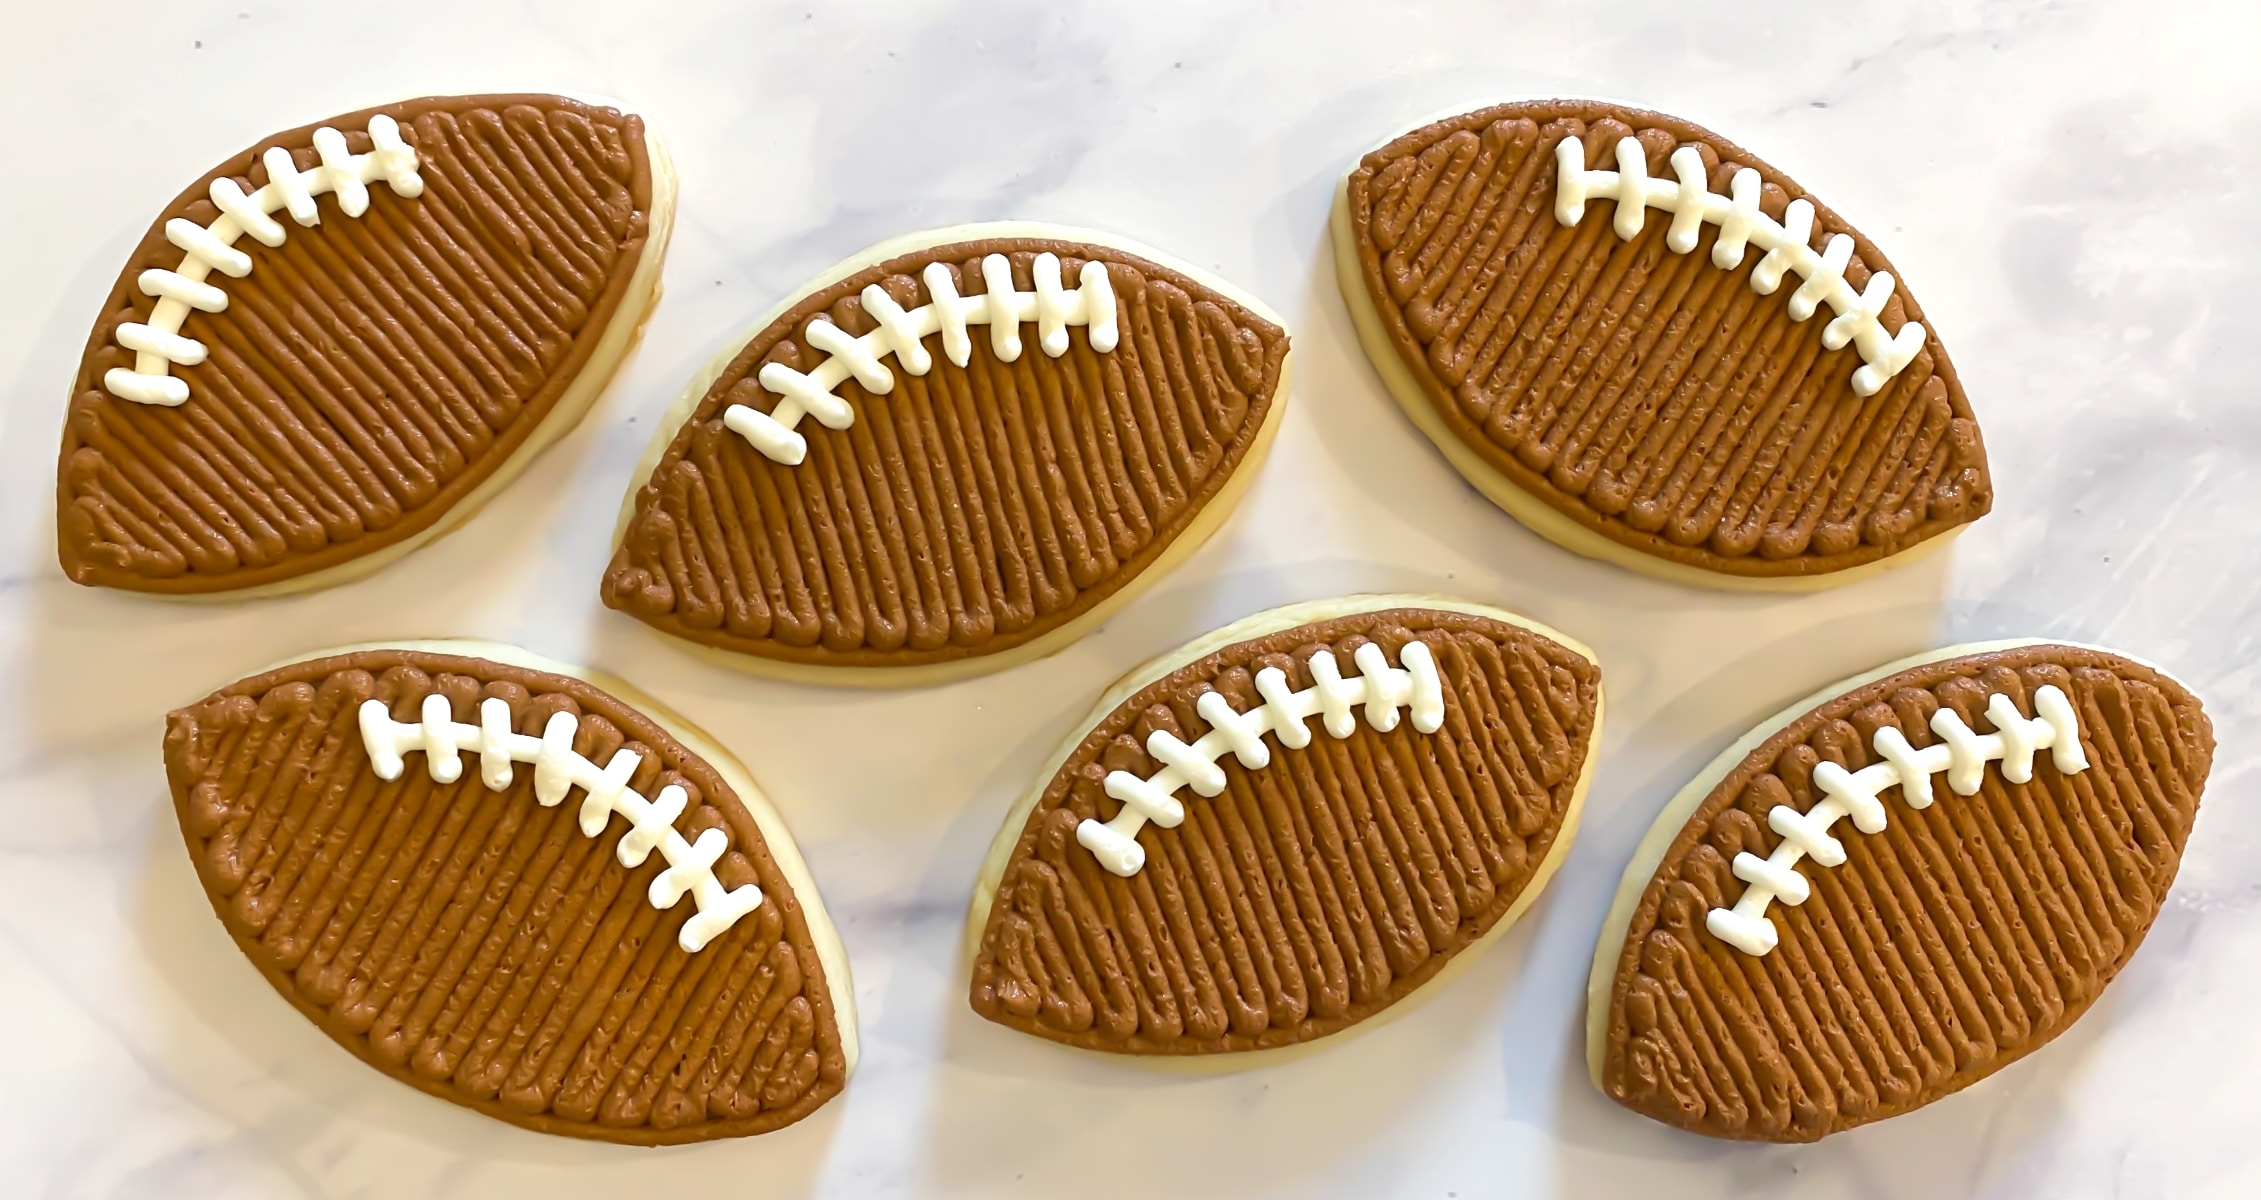 How to Decorate Football Sugar Cookies